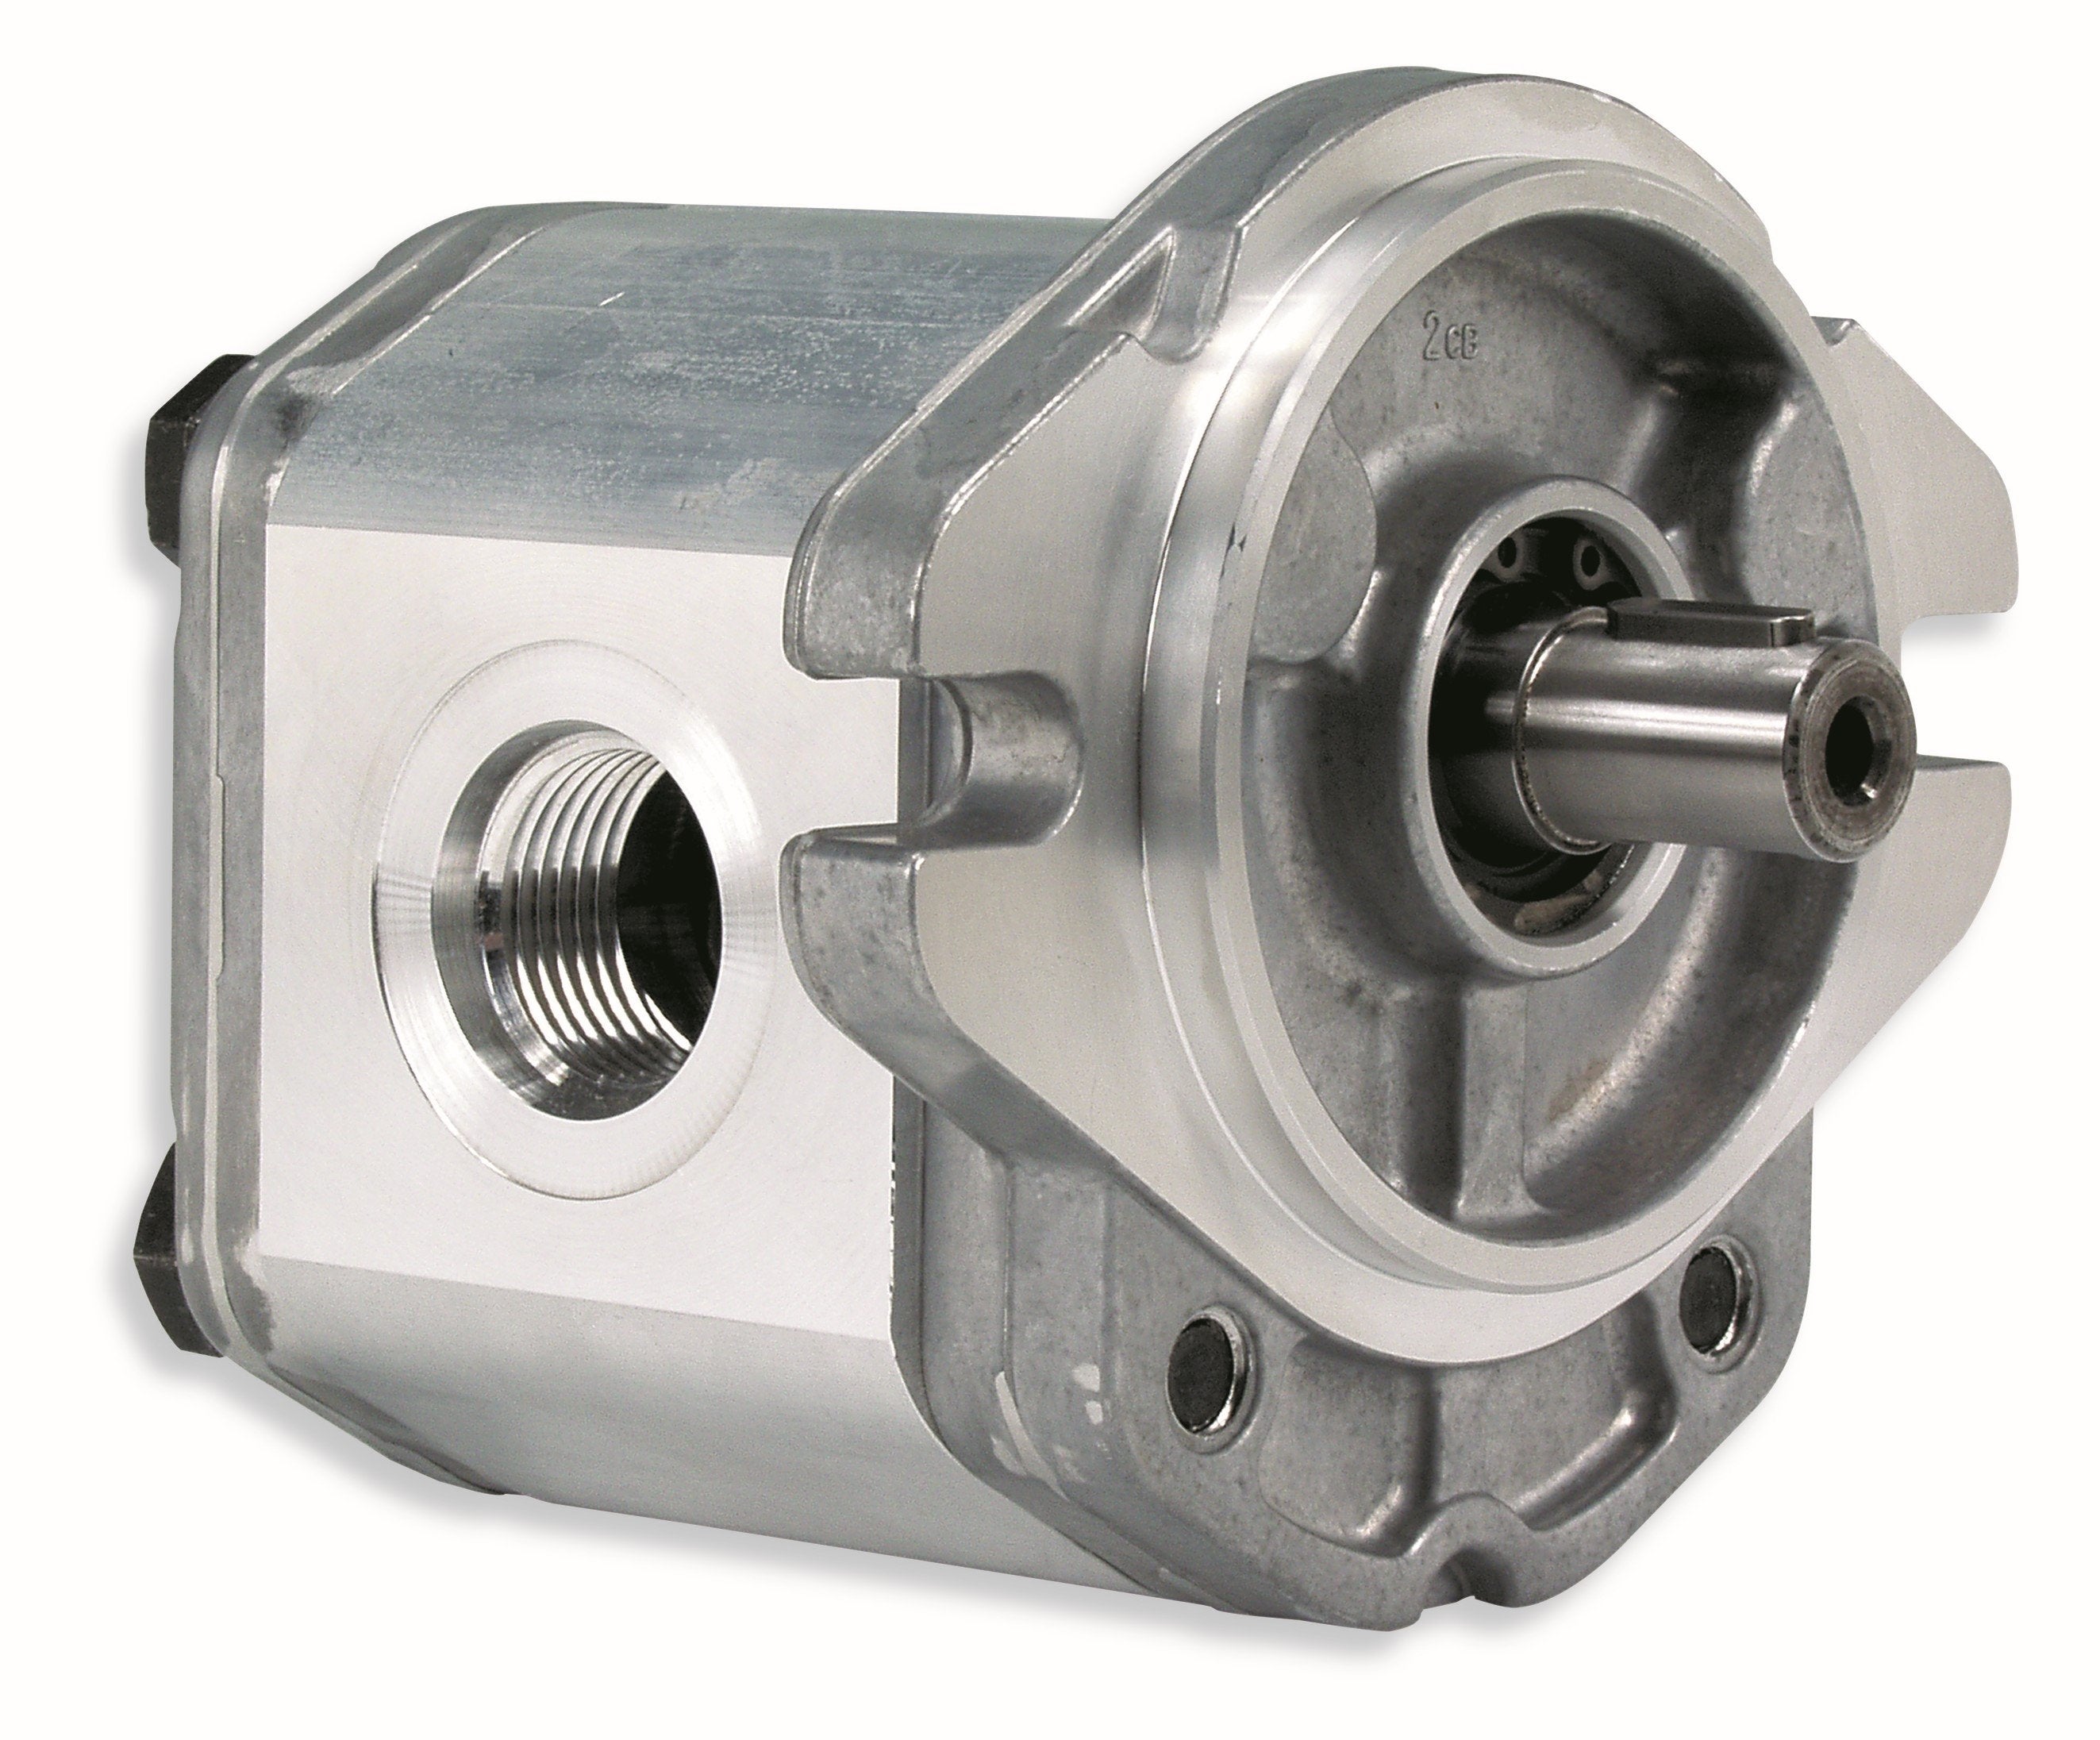 GHM2A-R-13-E2 : Marzocchi Gear Motor, Bidirectional, 9.6cc, 4060psi rated, 4000RPM, 0.75 (3/4") #12 SAE ports, 5/8" Bore x 5/32" Keyed Shaft